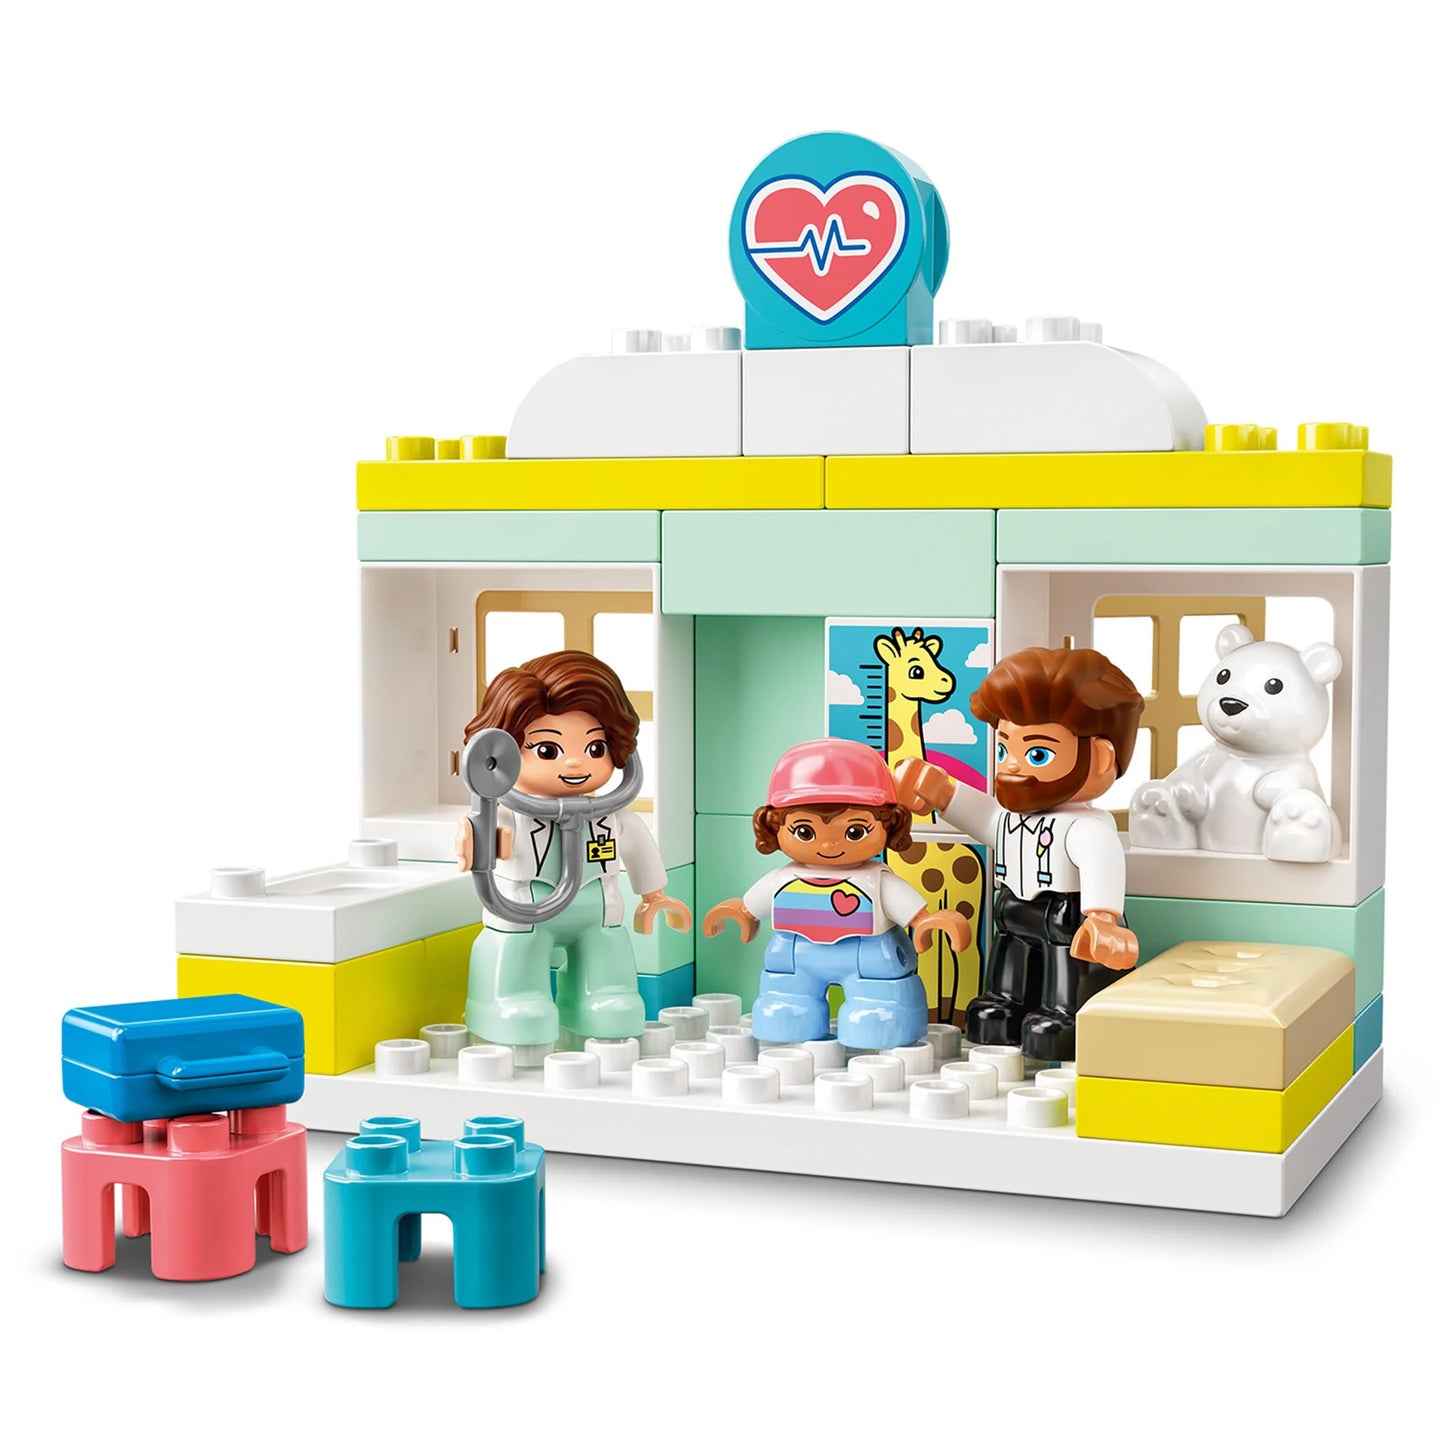 At the doctor-LEGO Duplo